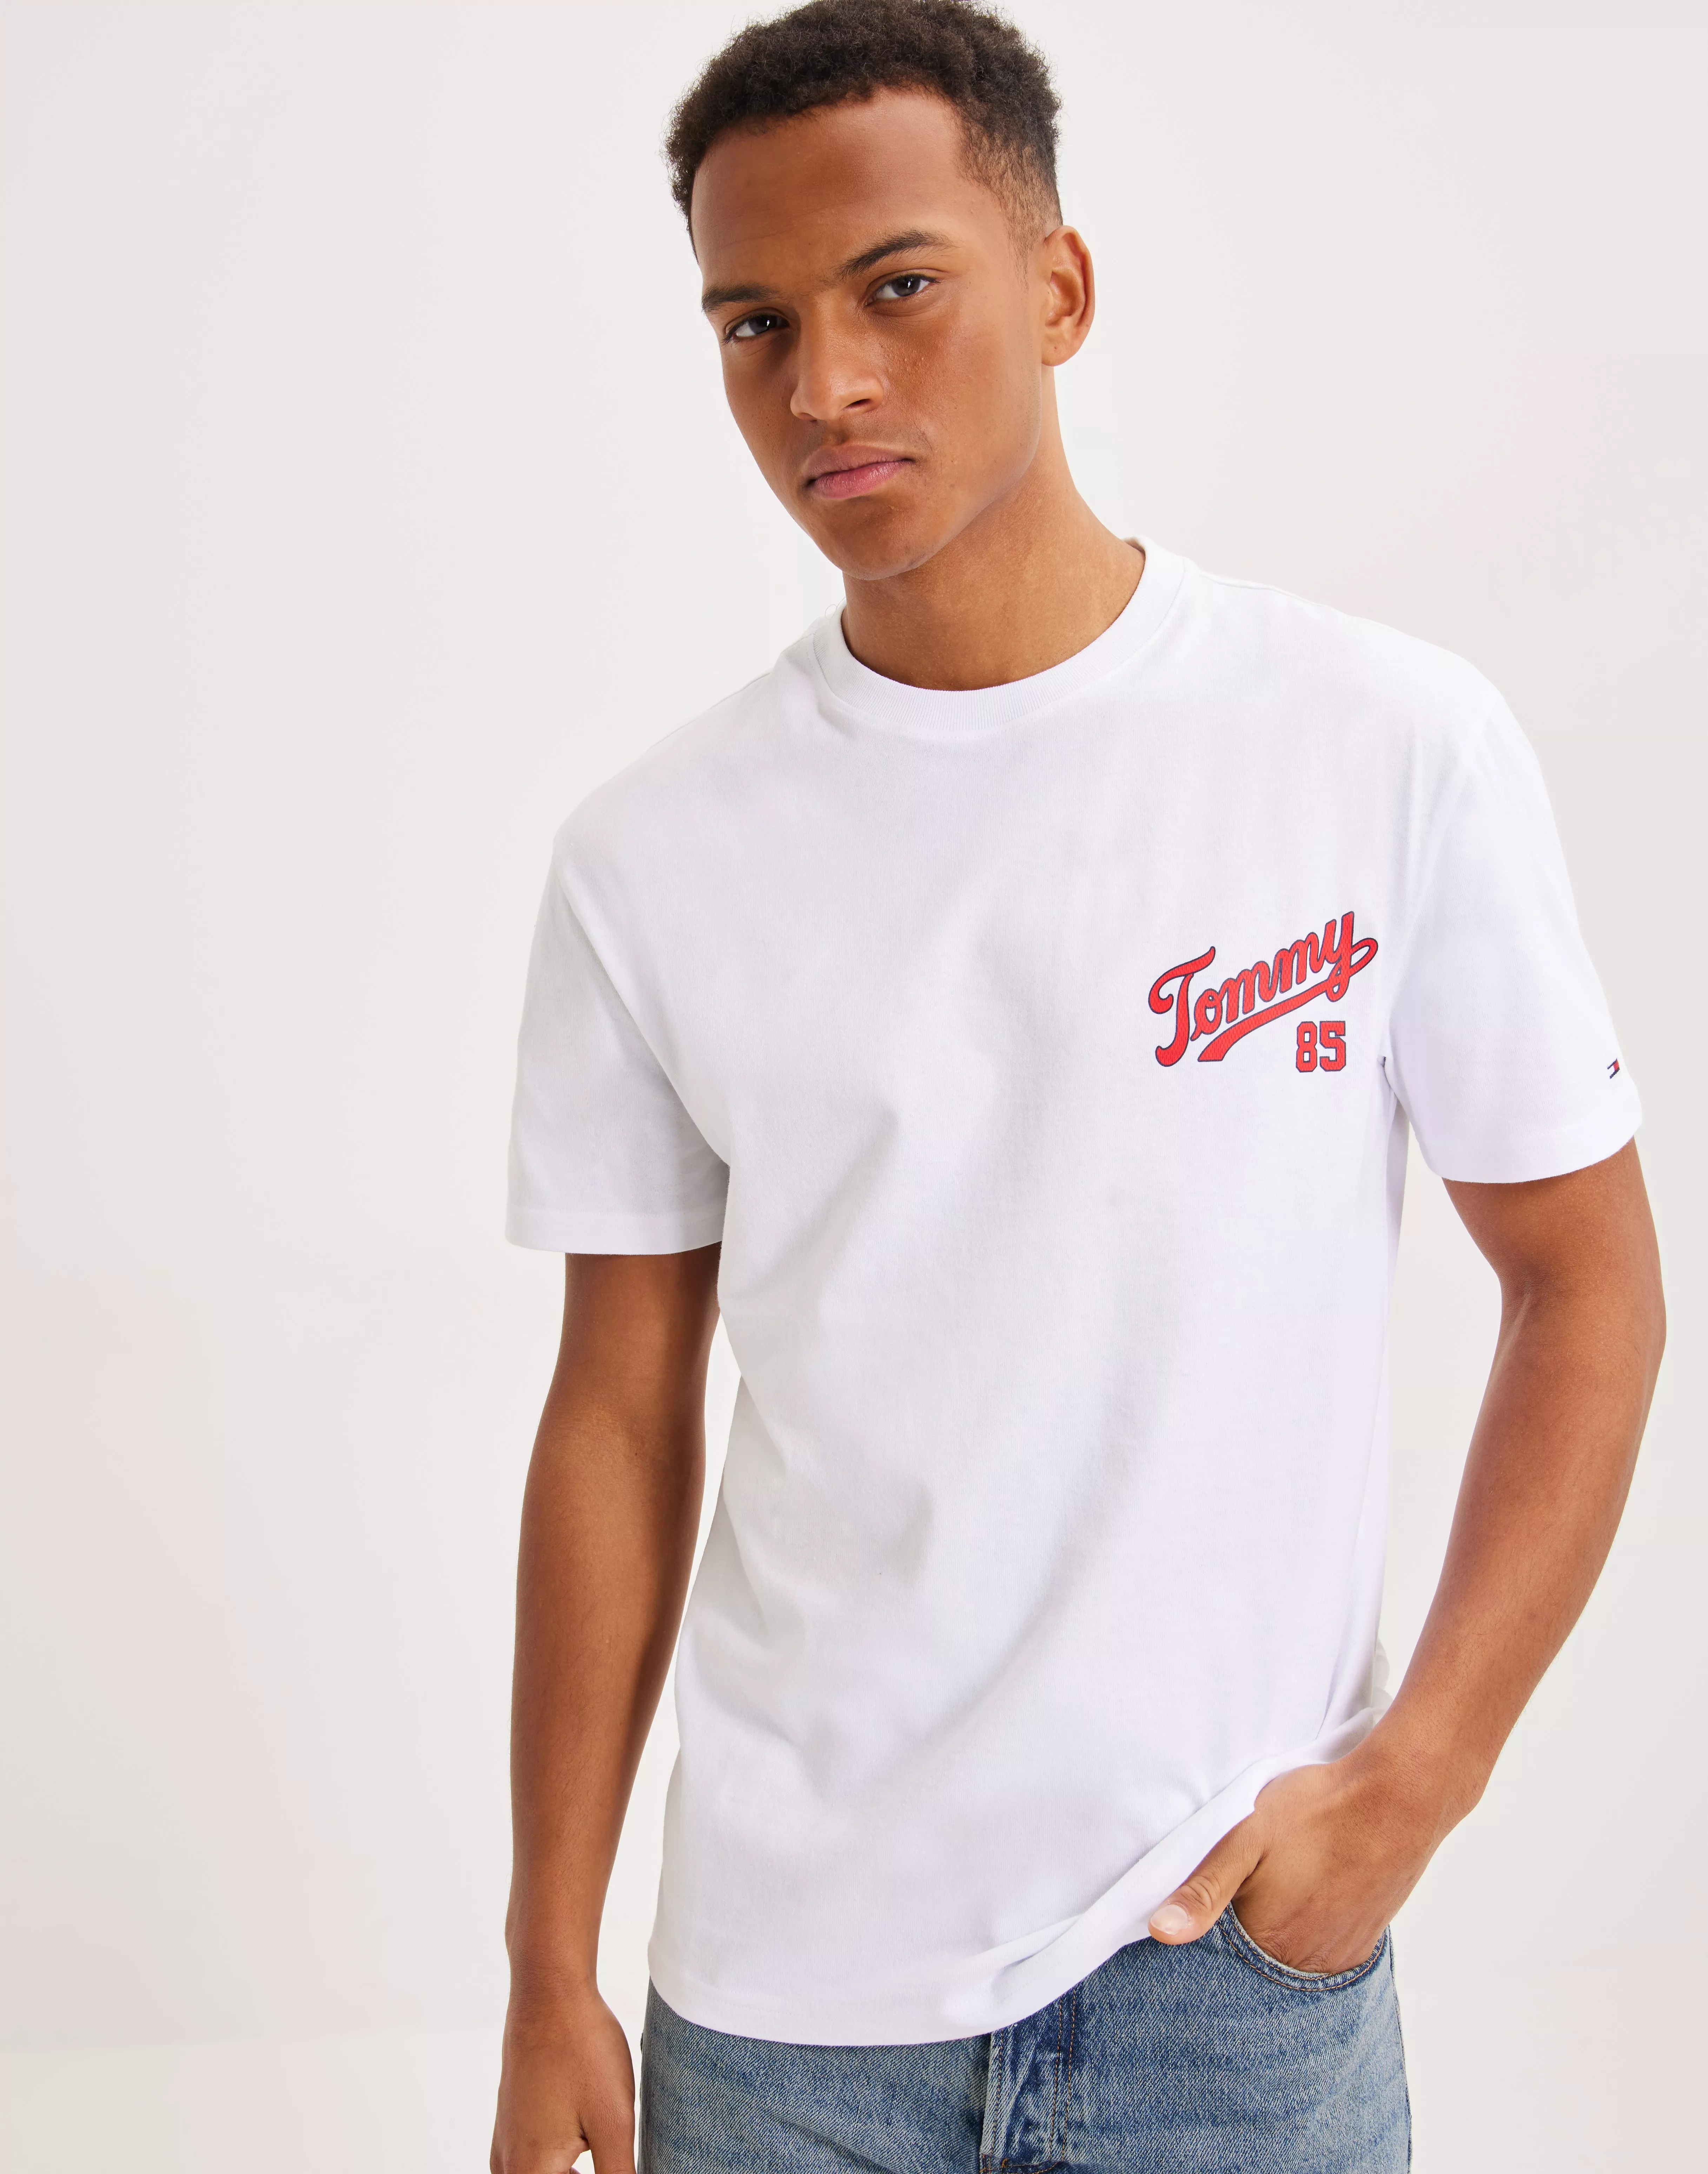 TEE TJM White | LOGO NLYMAN 85 Buy CLSC - Jeans COLLEGE Tommy